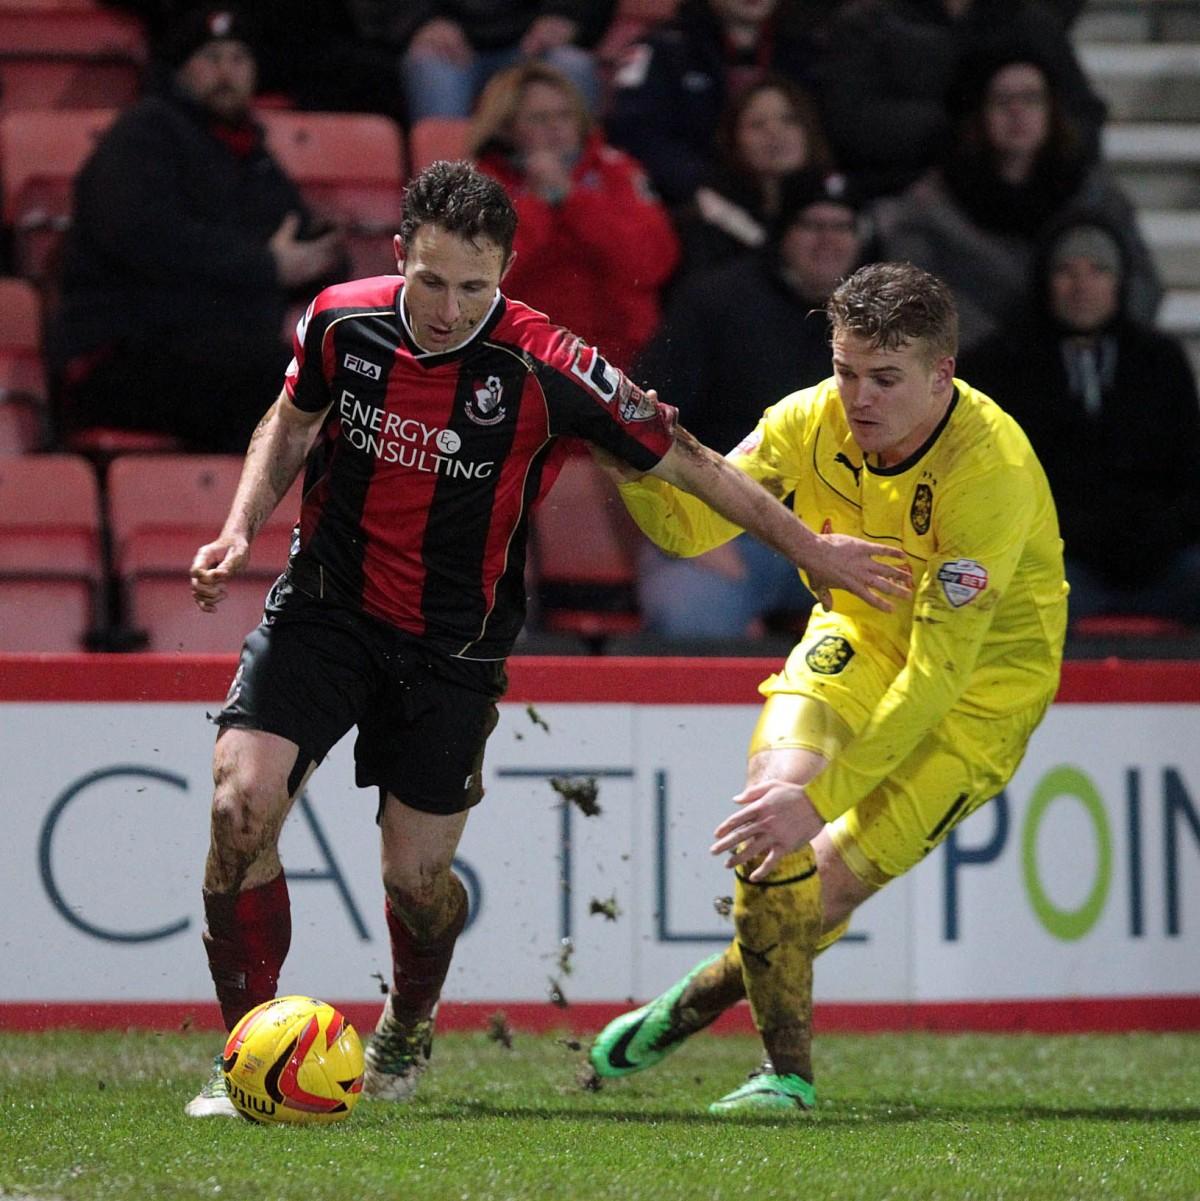 All our pictures from AFC Bournemouth v Huddersfield Town on Tuesday, January 28, 2014, at the Goldsands Stadium.